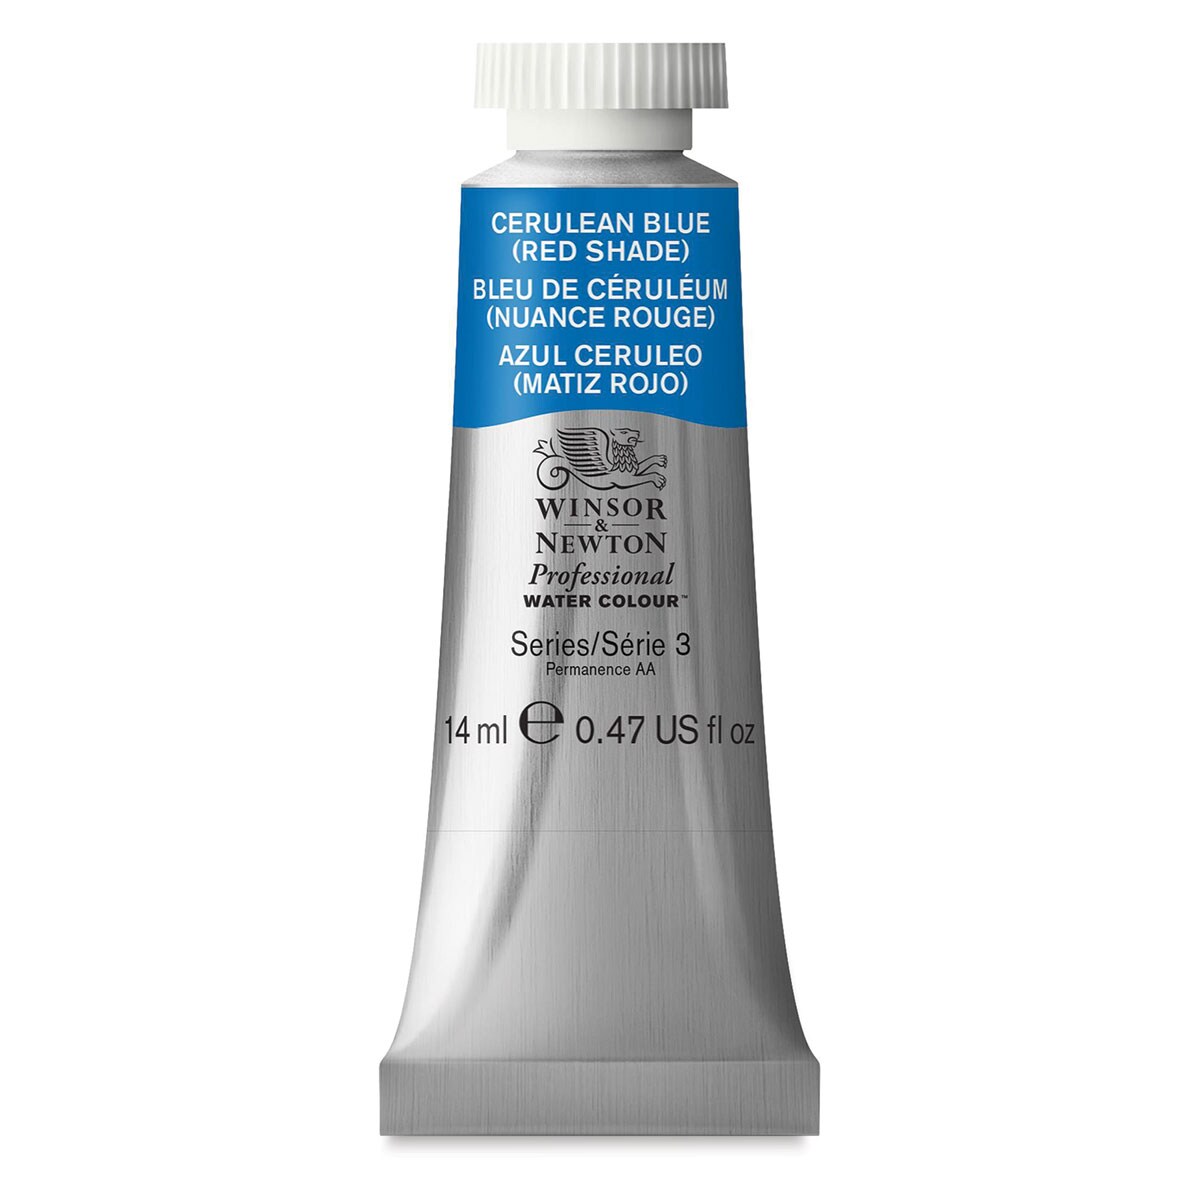 Winsor &#x26; Newton Professional Watercolor - Cerulean Blue (Red Shade), 14 ml Tube